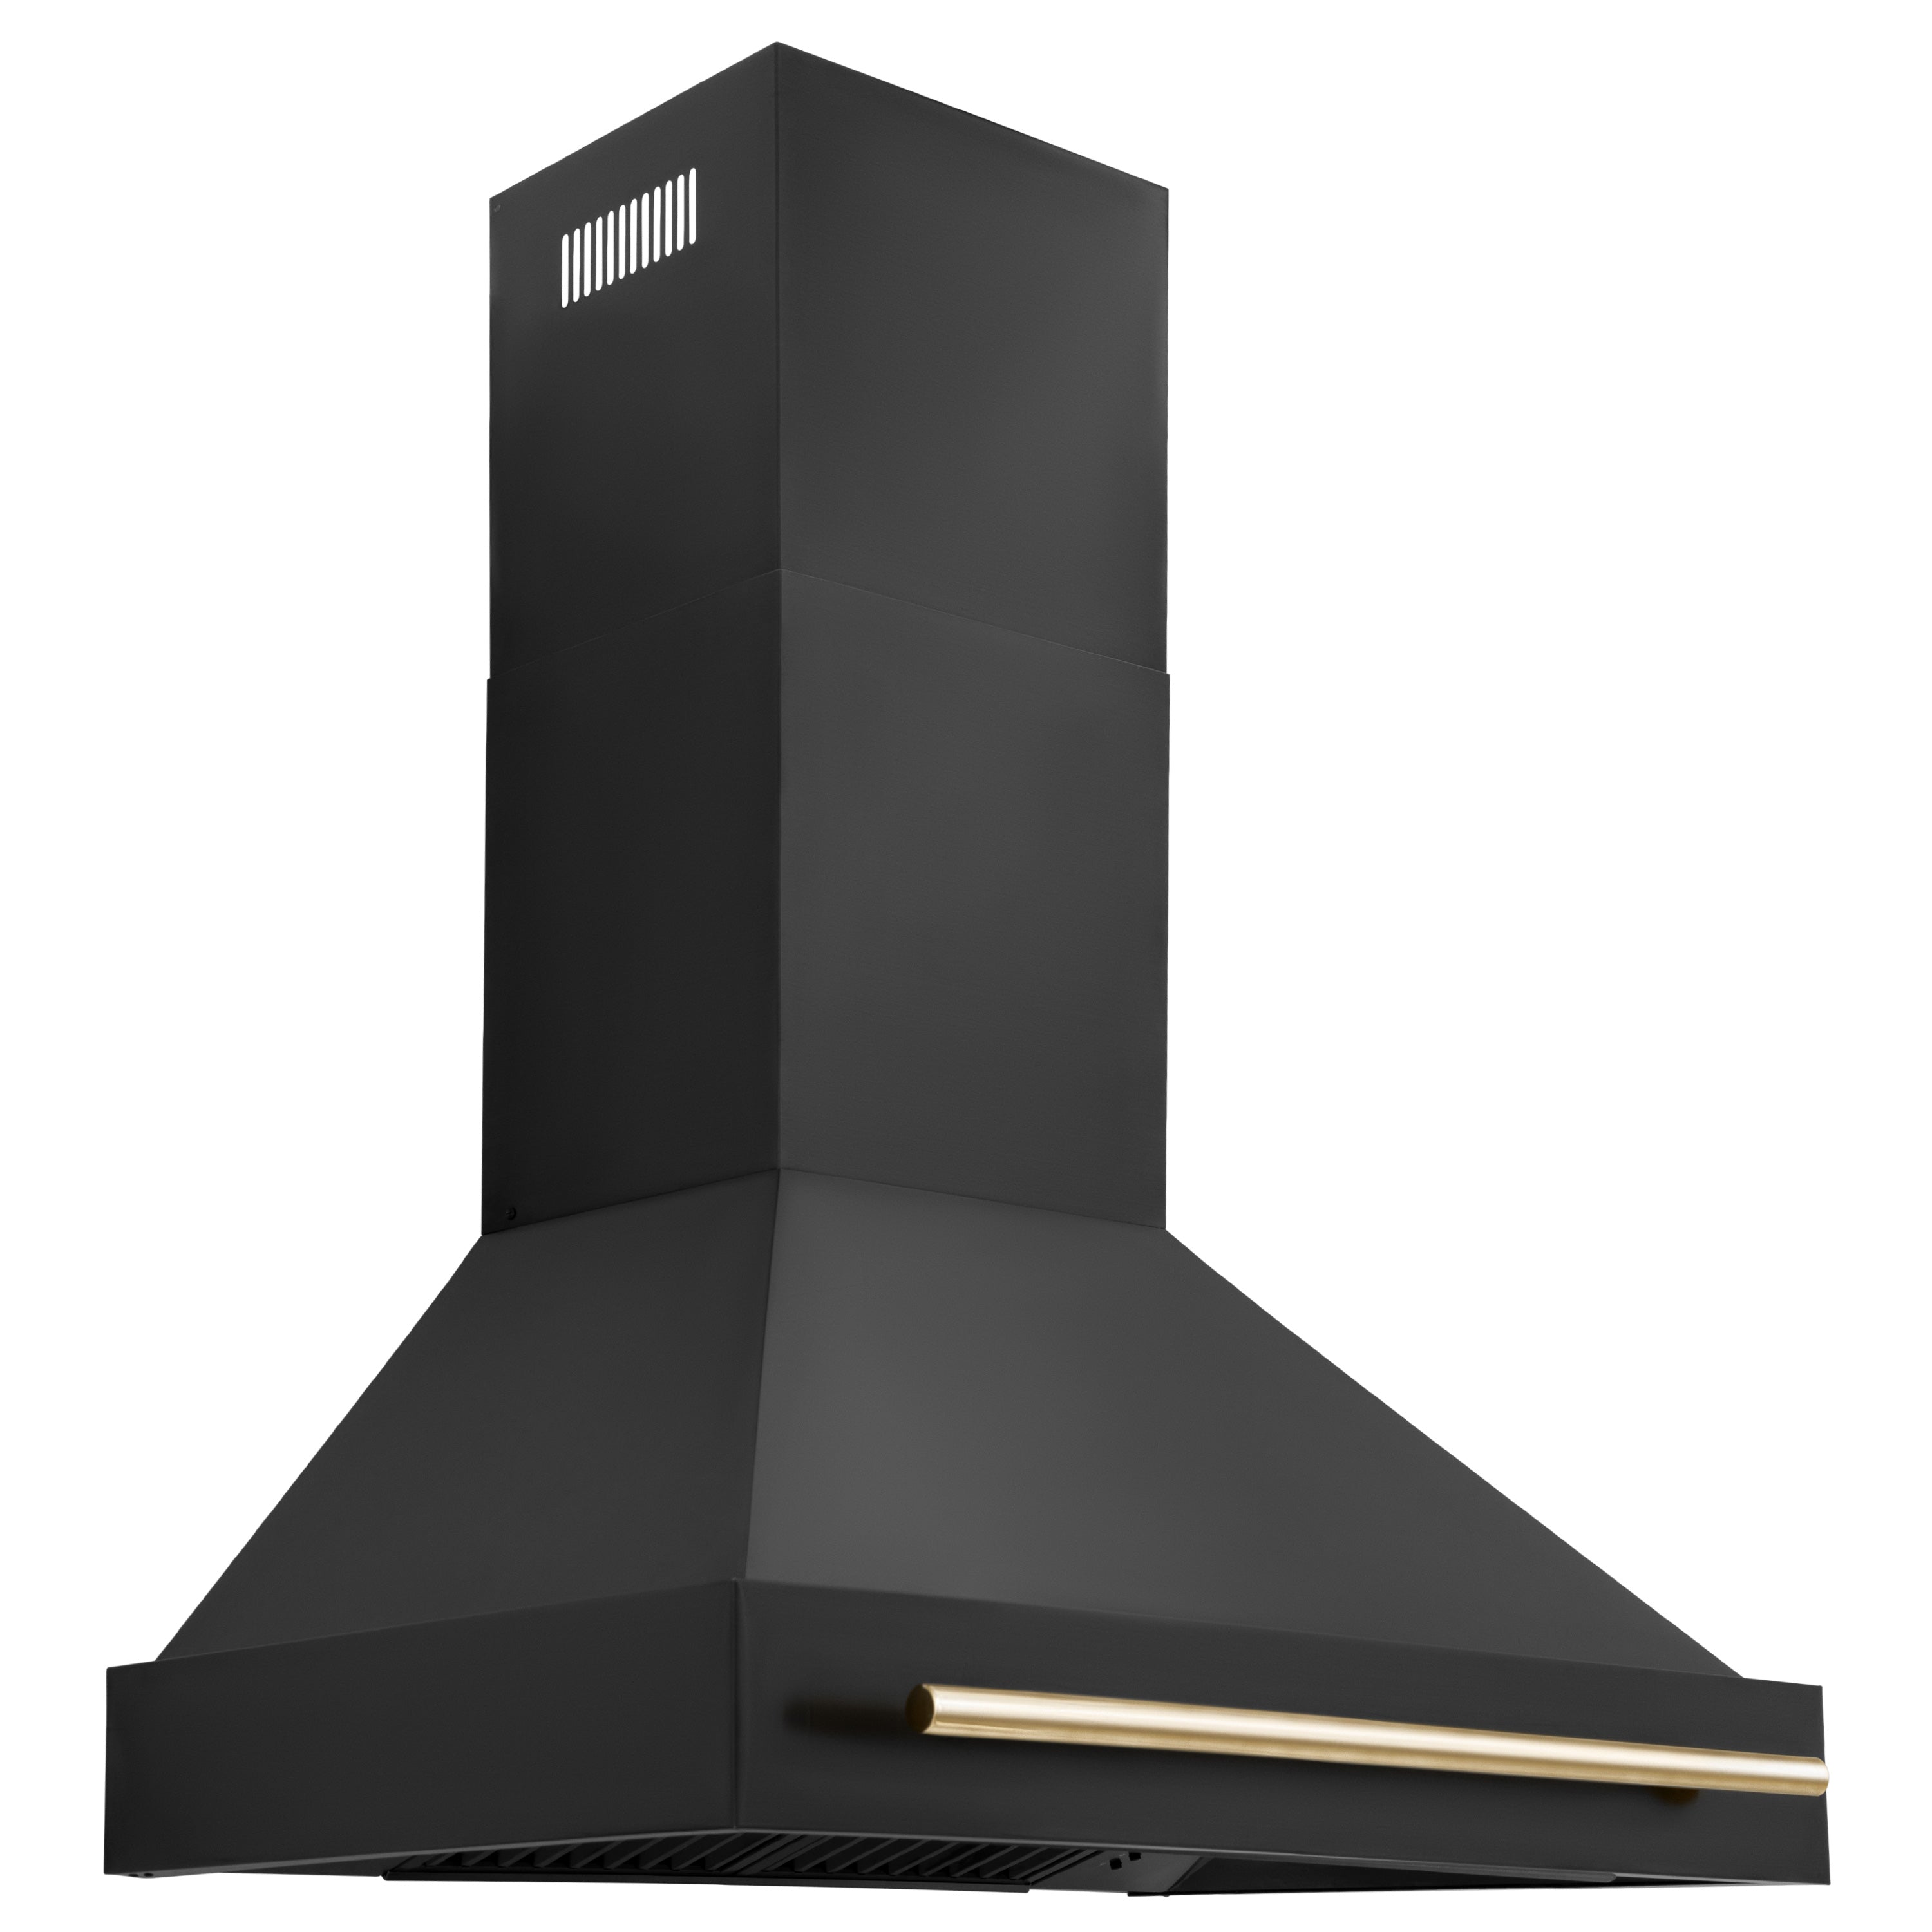 ZLINE 36 In. Autograph Edition Black Stainless Steel Range Hood with Gold Handle, BS655Z-36-G